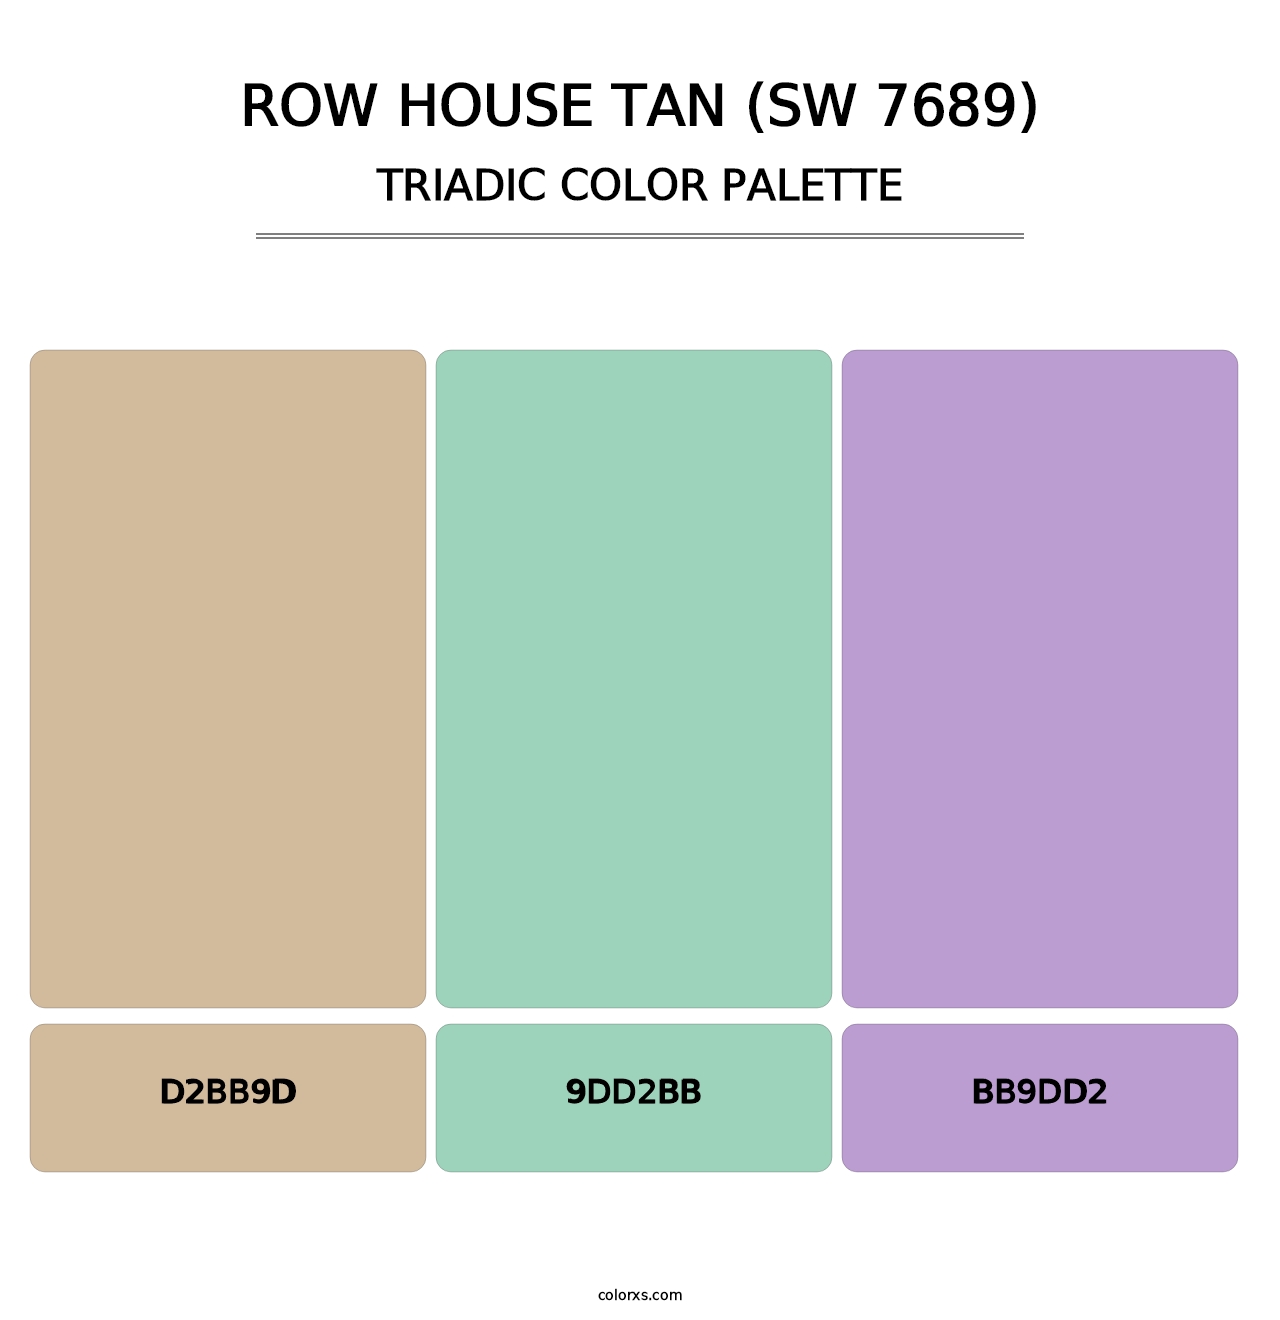 Row House Tan (SW 7689) - Triadic Color Palette